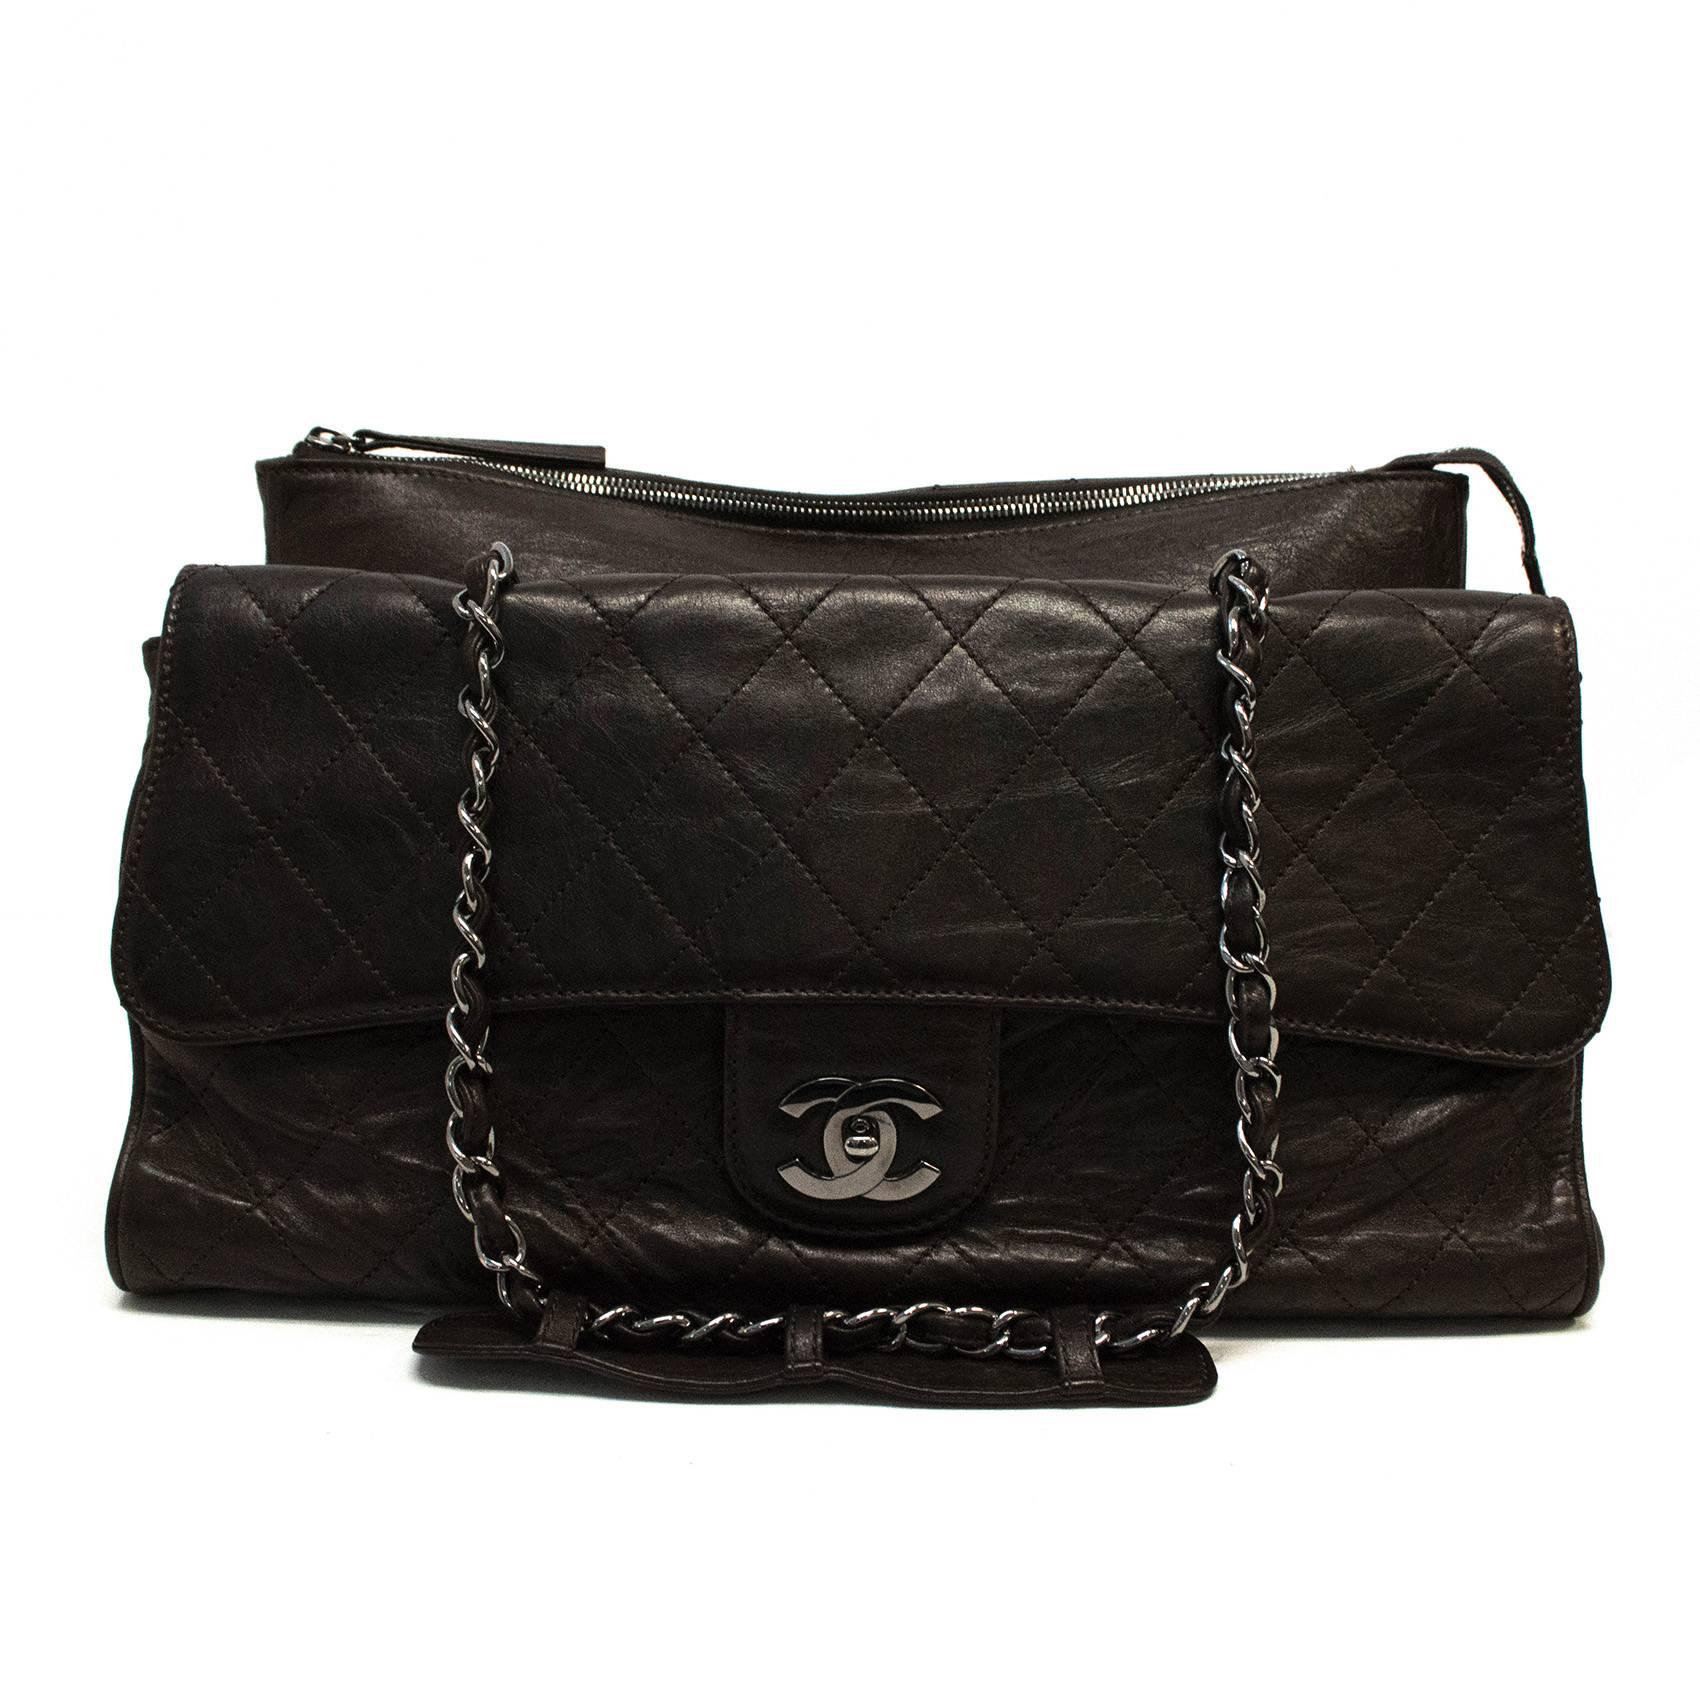 This versatile Chanel bag features an exterior envelope closure compartment and a back zip closure compartment. The middle compartment is in a gladstone shaped bag and it closes with a Chanel motif latch. The interlaced silver chain shoulder straps